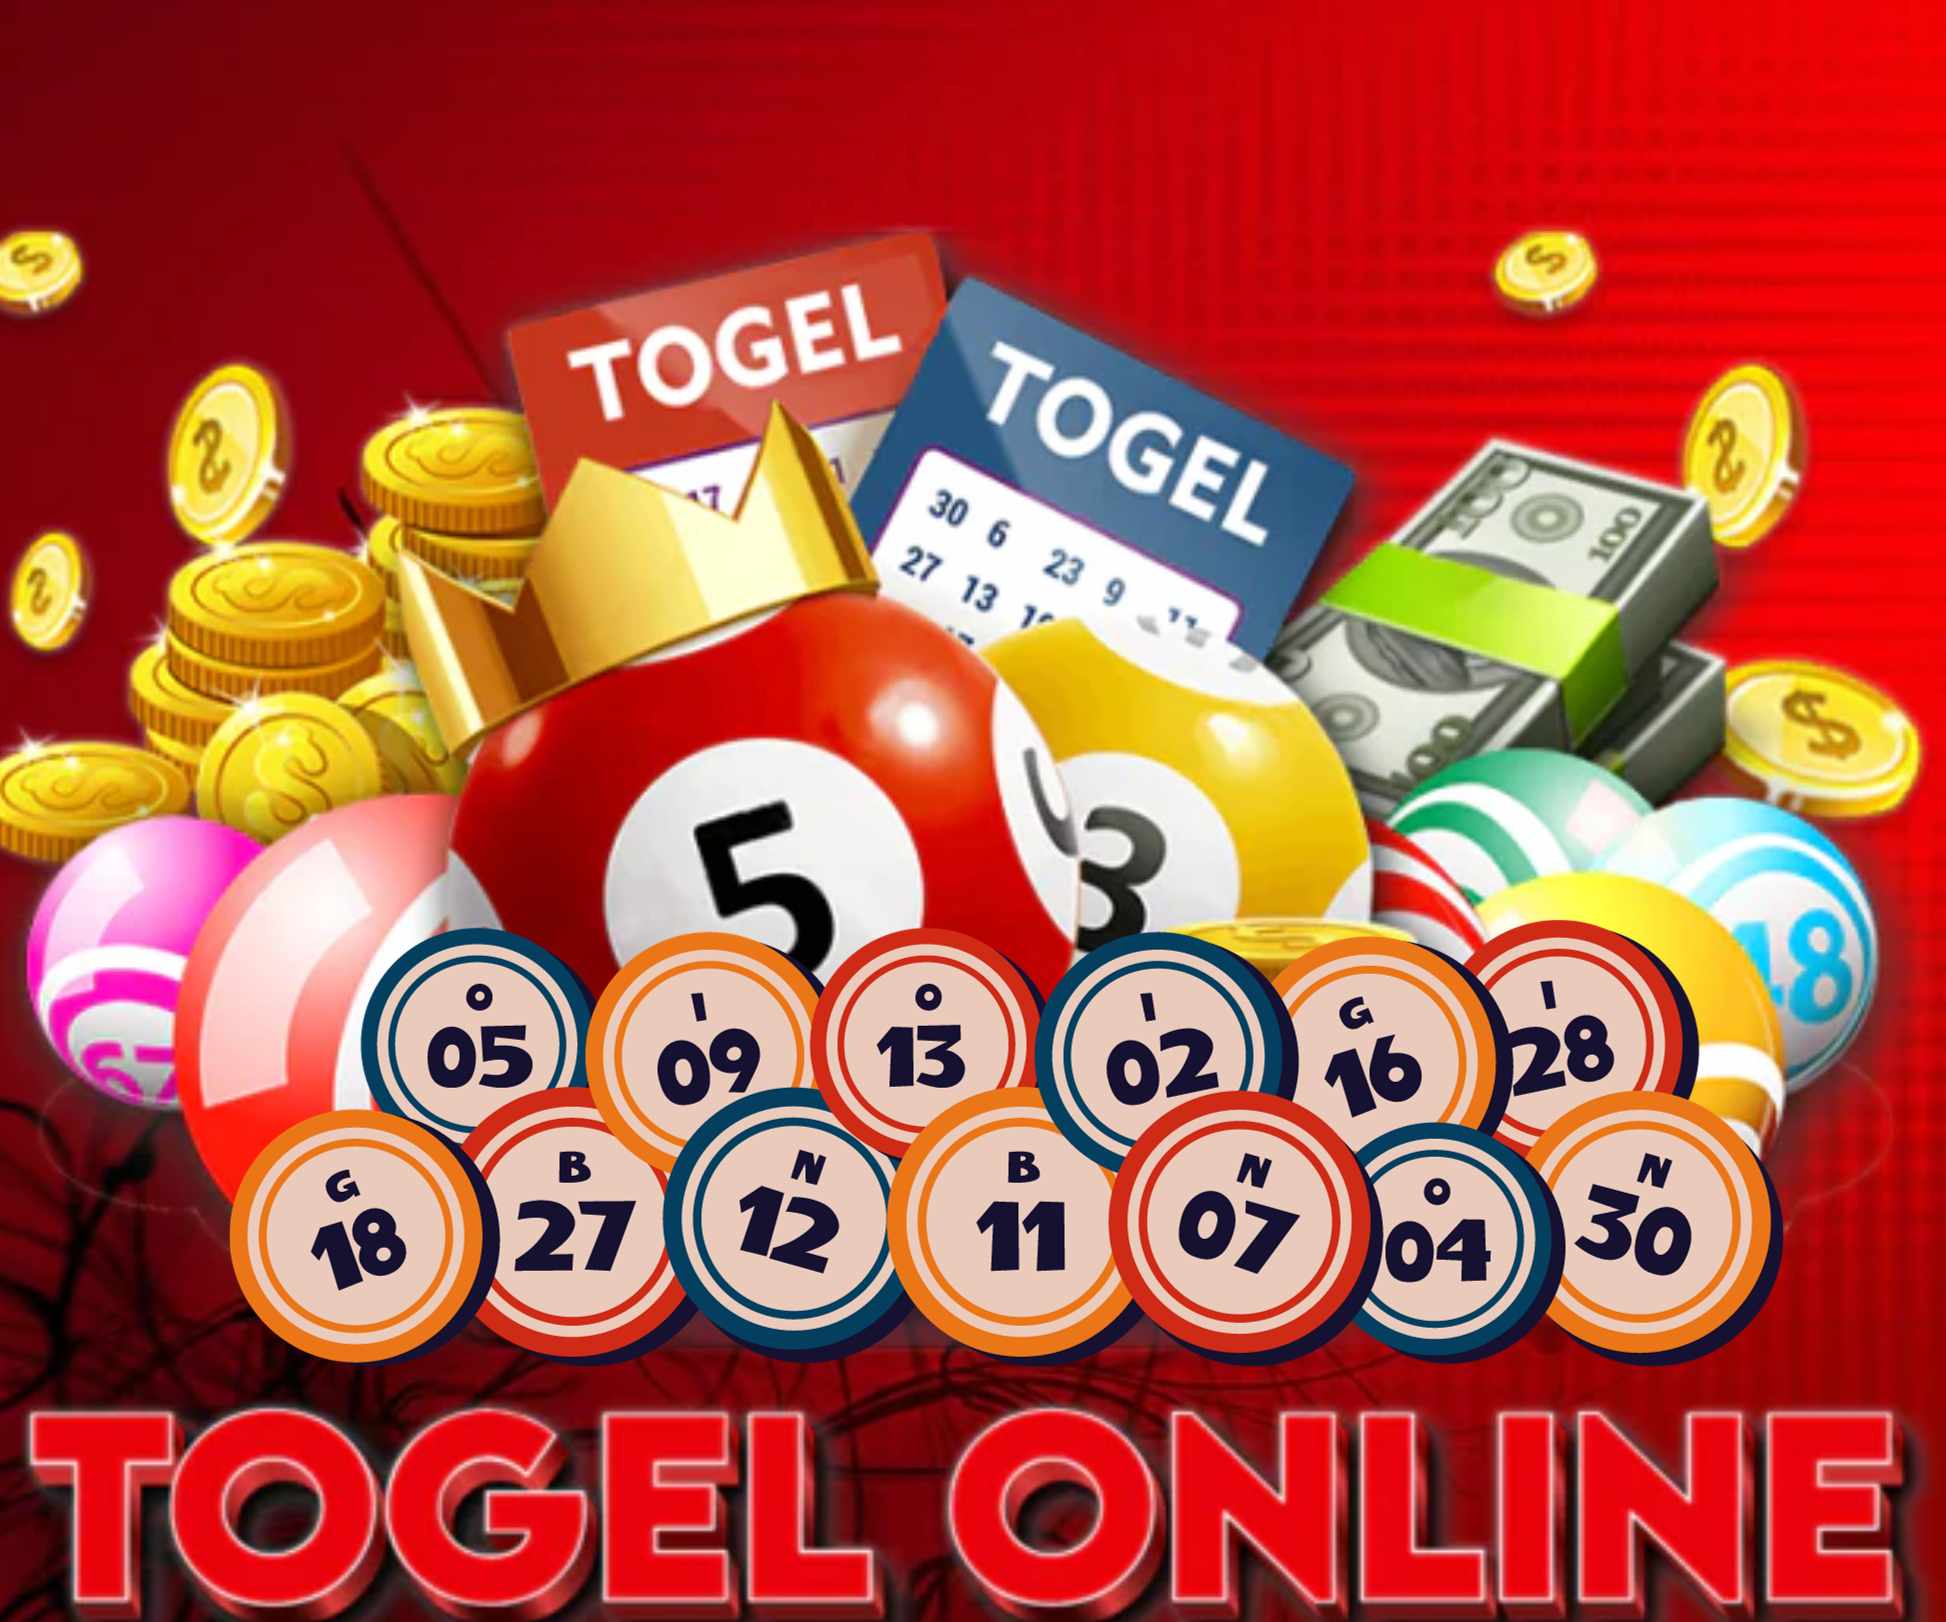 Why are no togel a long-awaited expense?